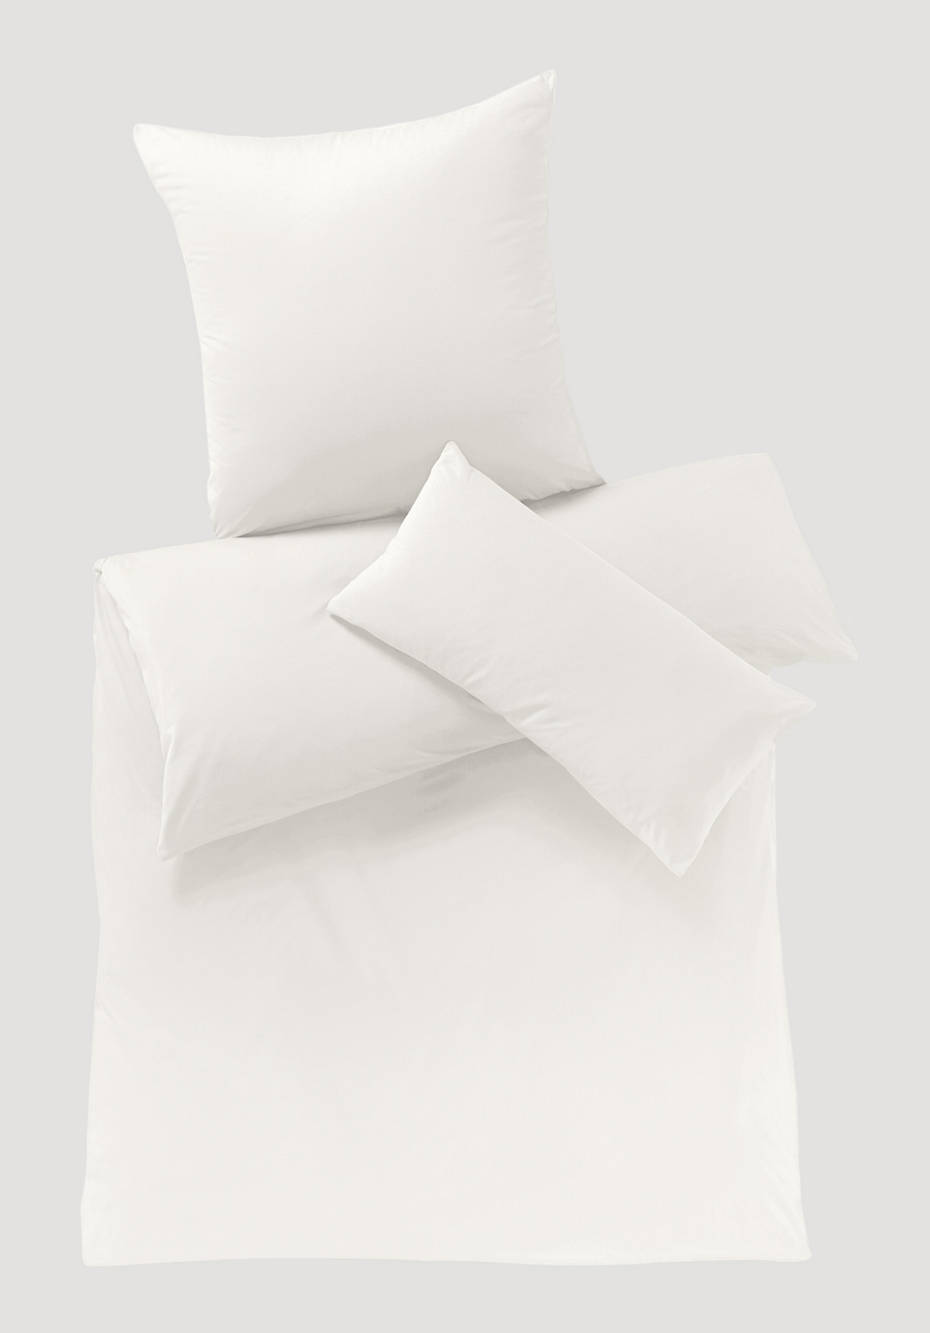 Satin bed linen in a set made from pure organic cotton